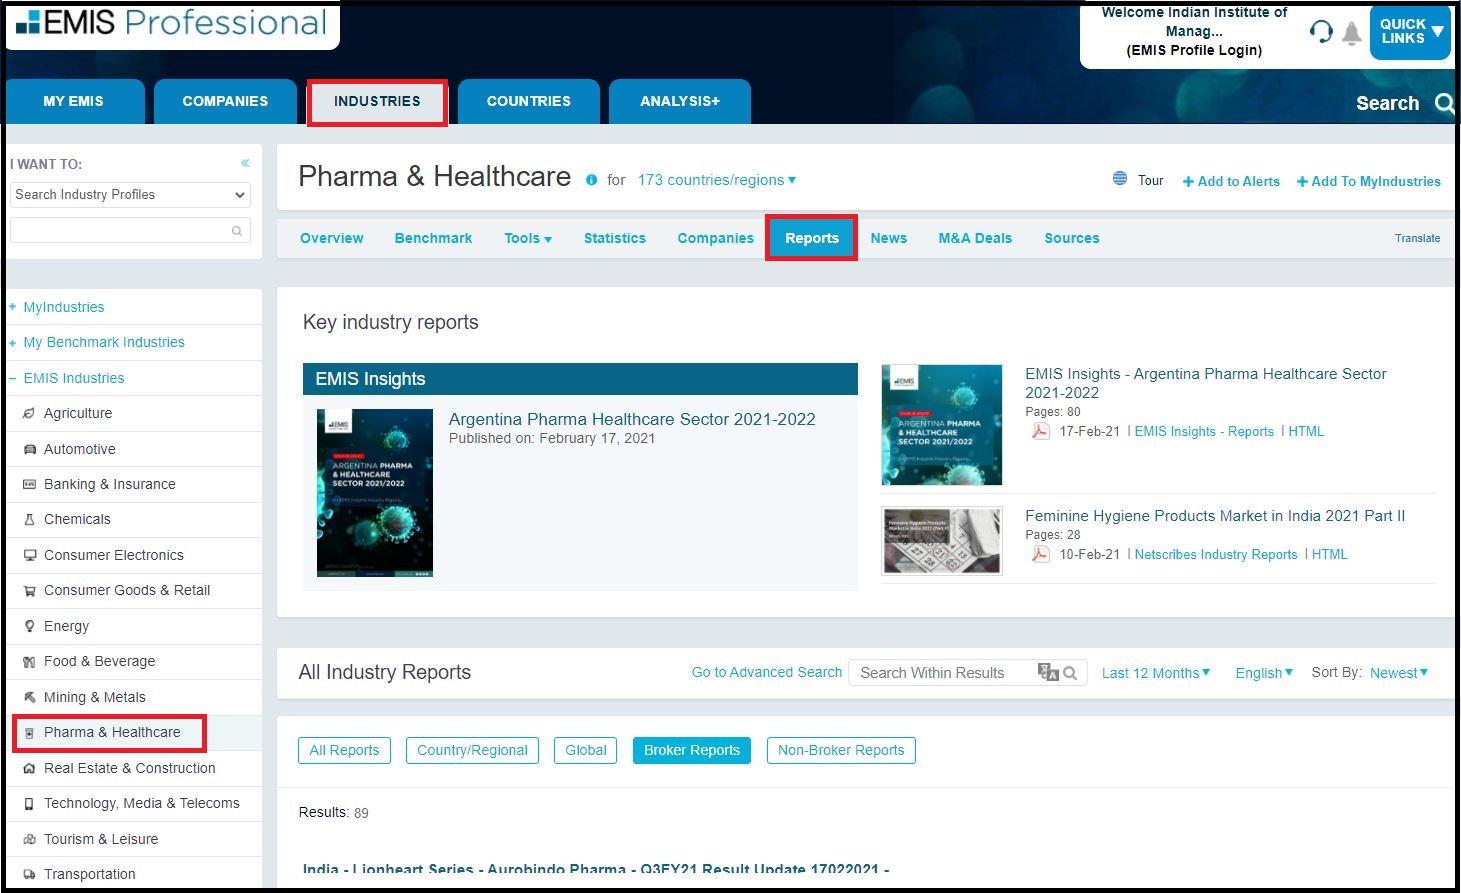 EMIS Intelligence (Professional) and Select Industry Analysis then Click on Pharma & Healthcare then Click on Report then Select Broker Reports